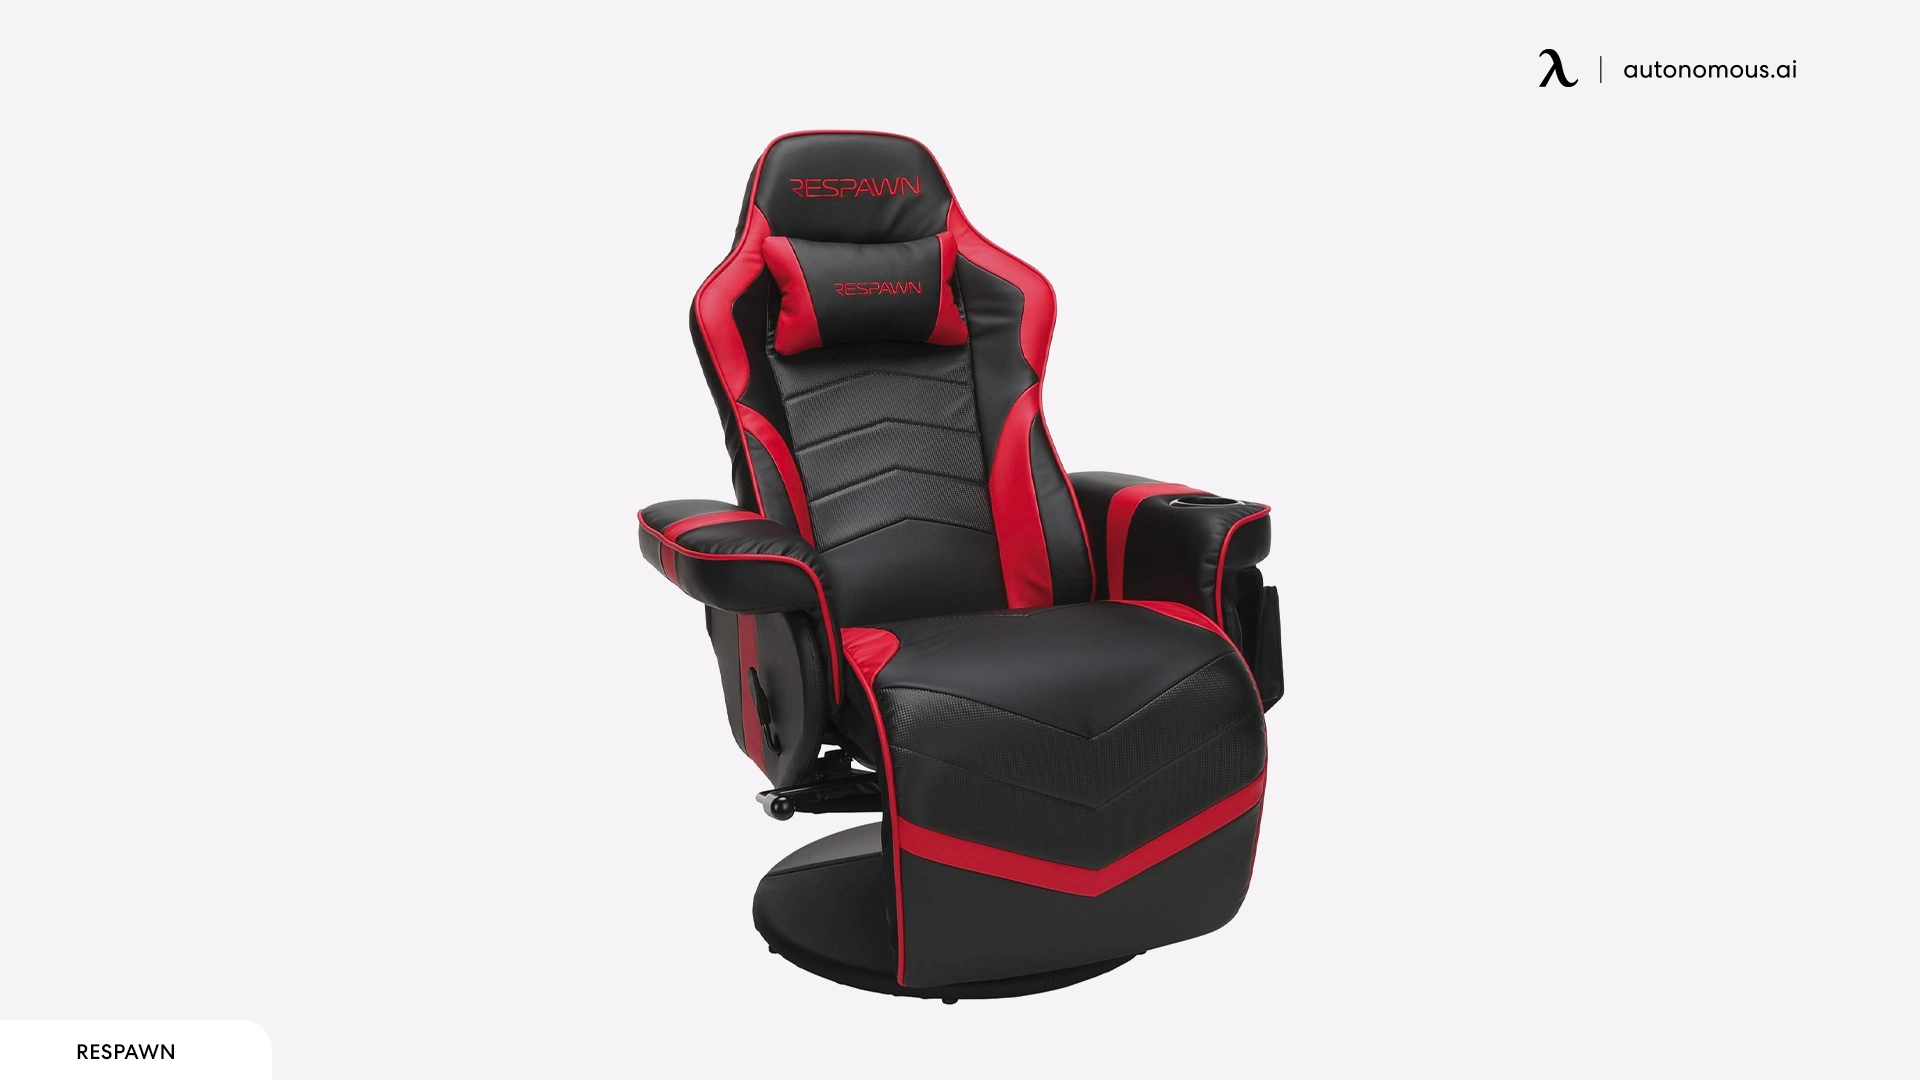 RESPAWN RSP-900 Racing Style Gaming Chair